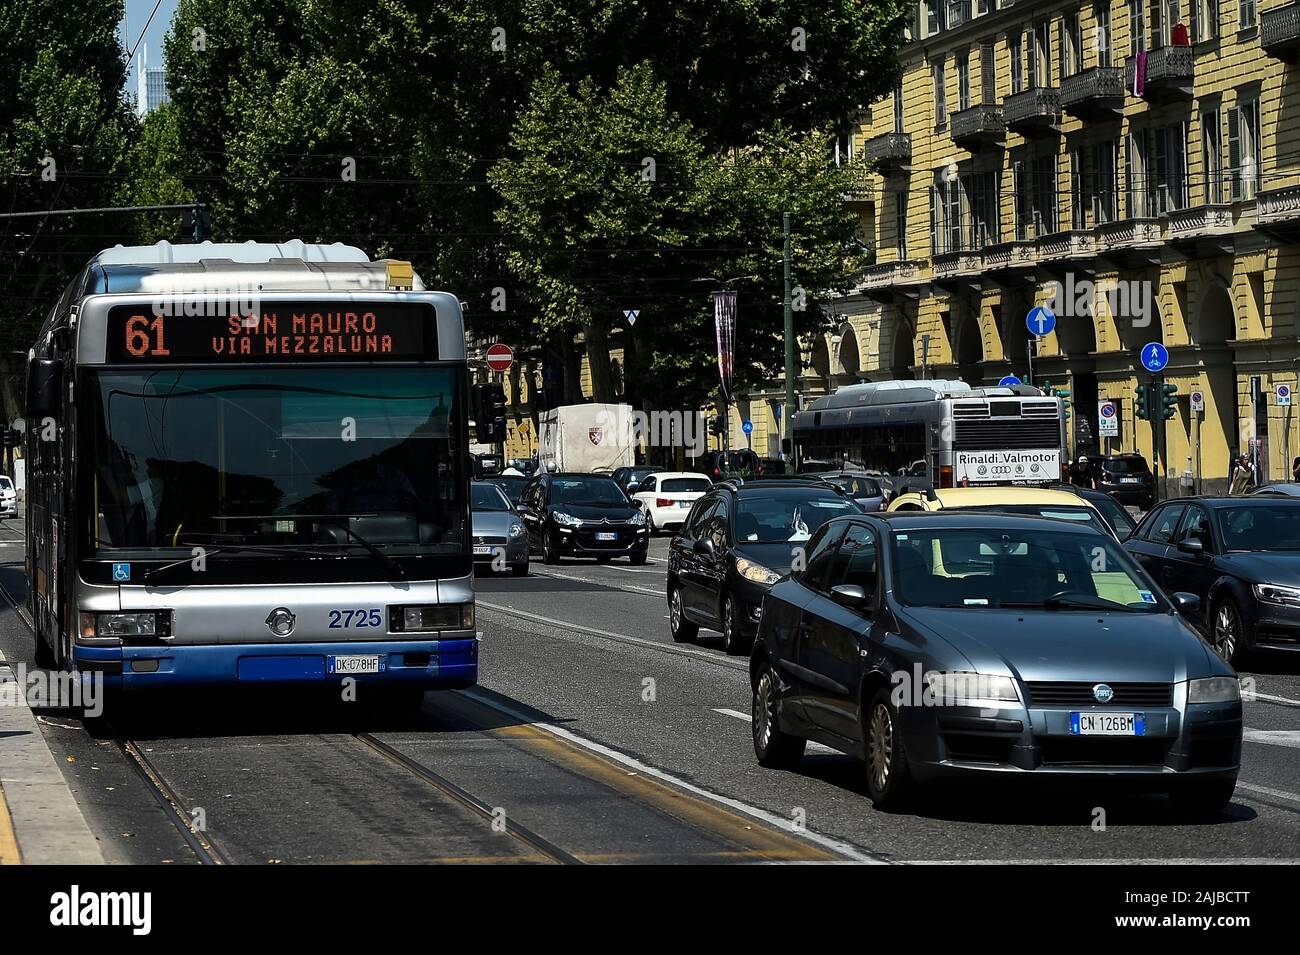 Turin, Italy - 24 July, 2019: A bus is seen near Porta Nuova railway station.  On 24 July 2019 Italian trade unions call a strike action that affects  public transport including trains,